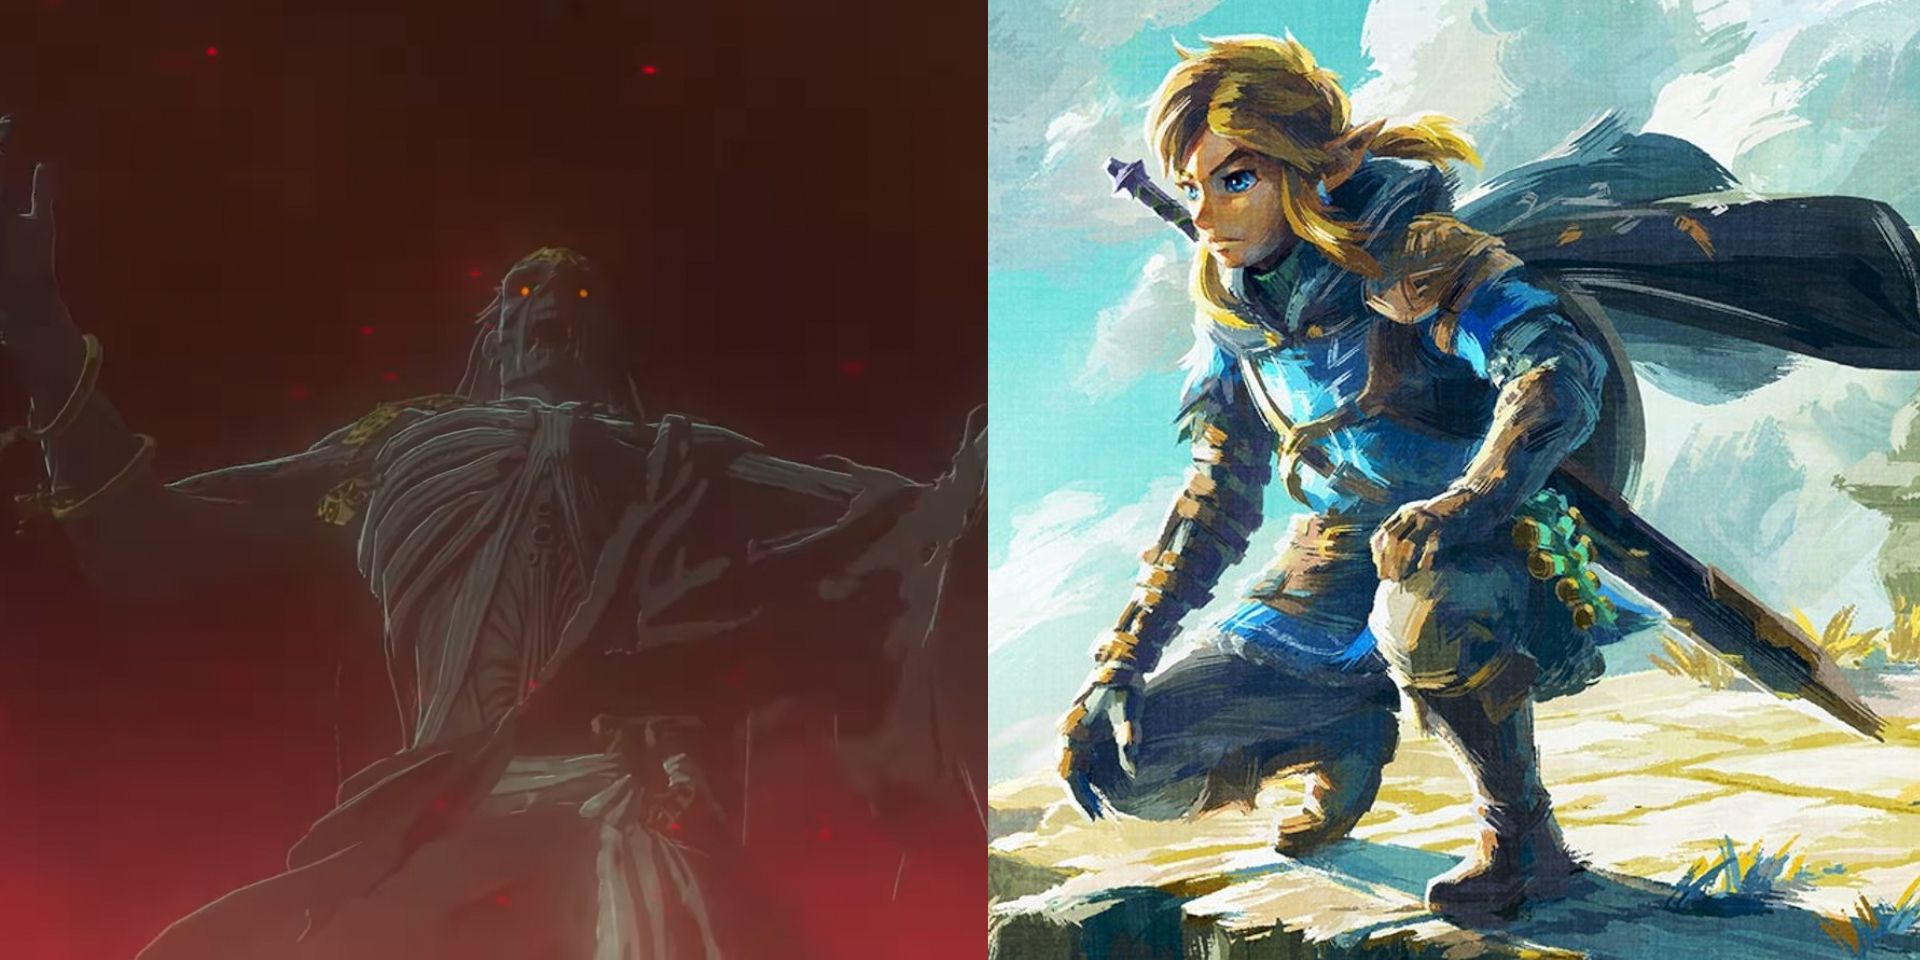 A split image showing Tears of the Kingdom's undead villain on the left, and Link in the key art on the right.